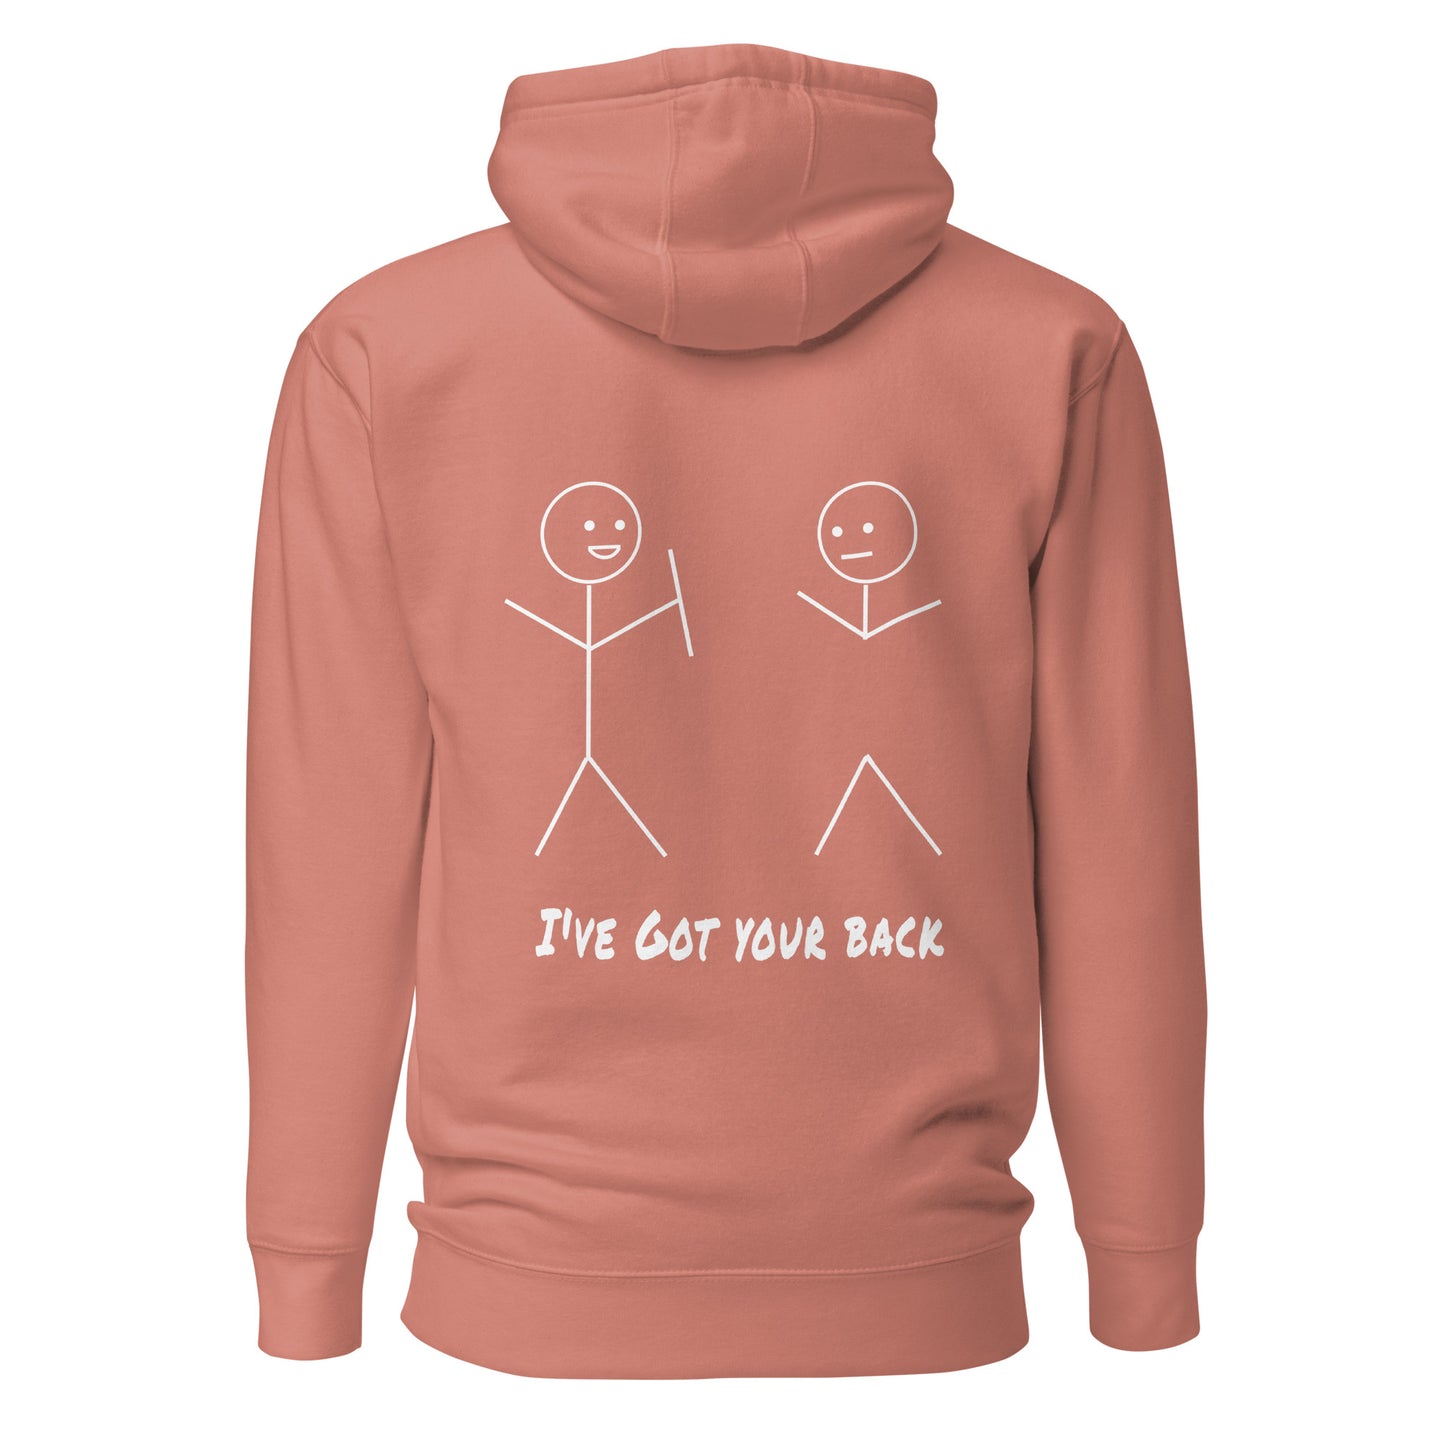 "I Got Your Back" Hoodie